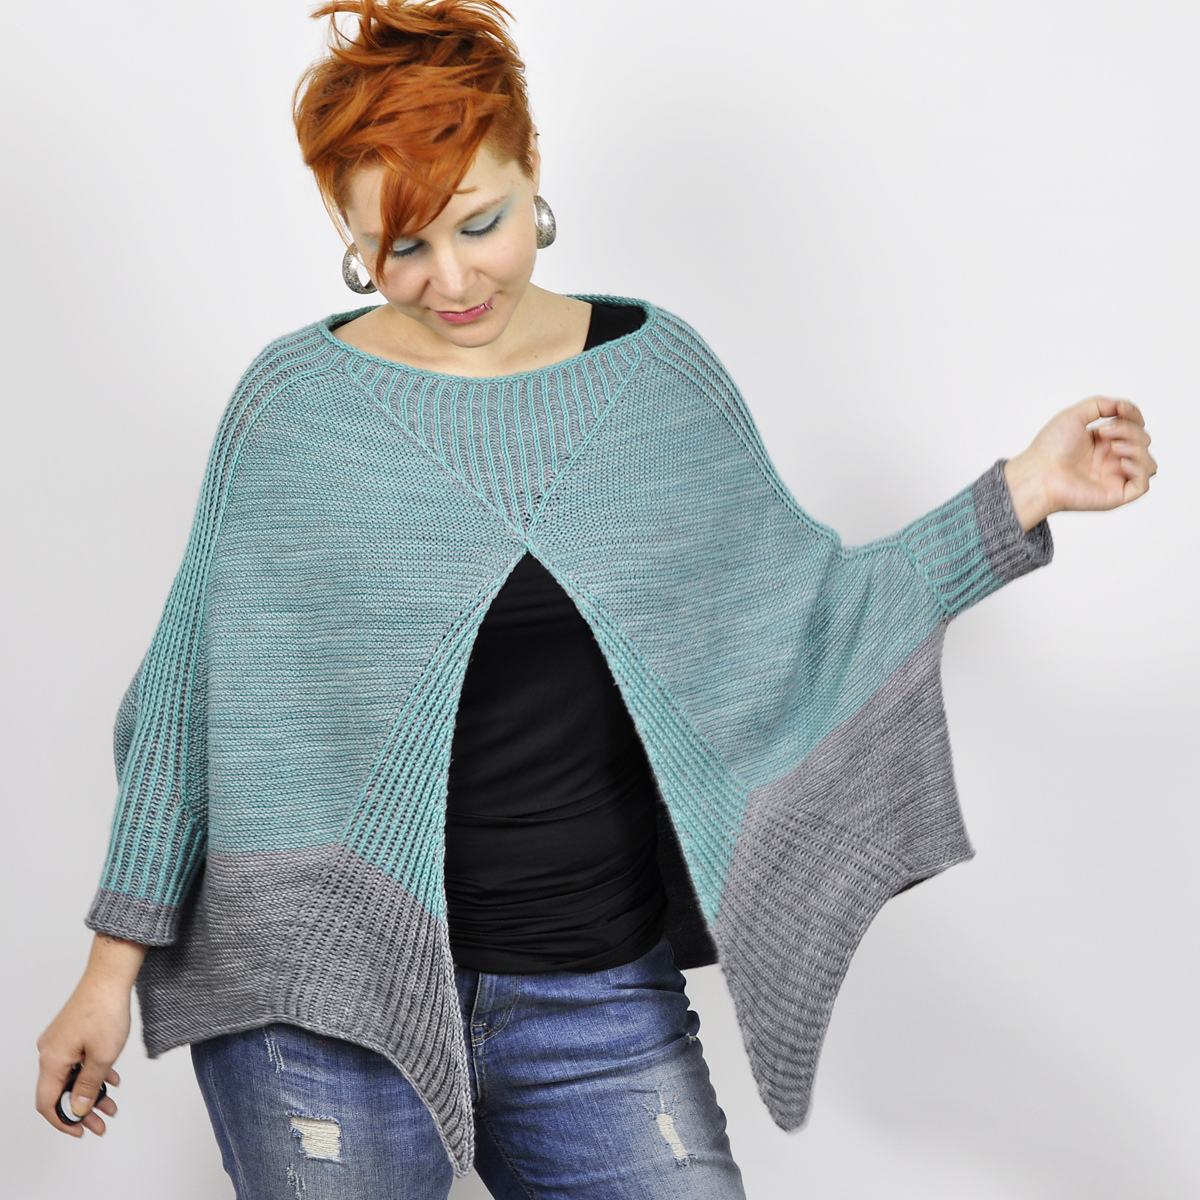 Knit a P-Rex Poncho (Or Is It A Cape?) Designed By Susanne Sommer